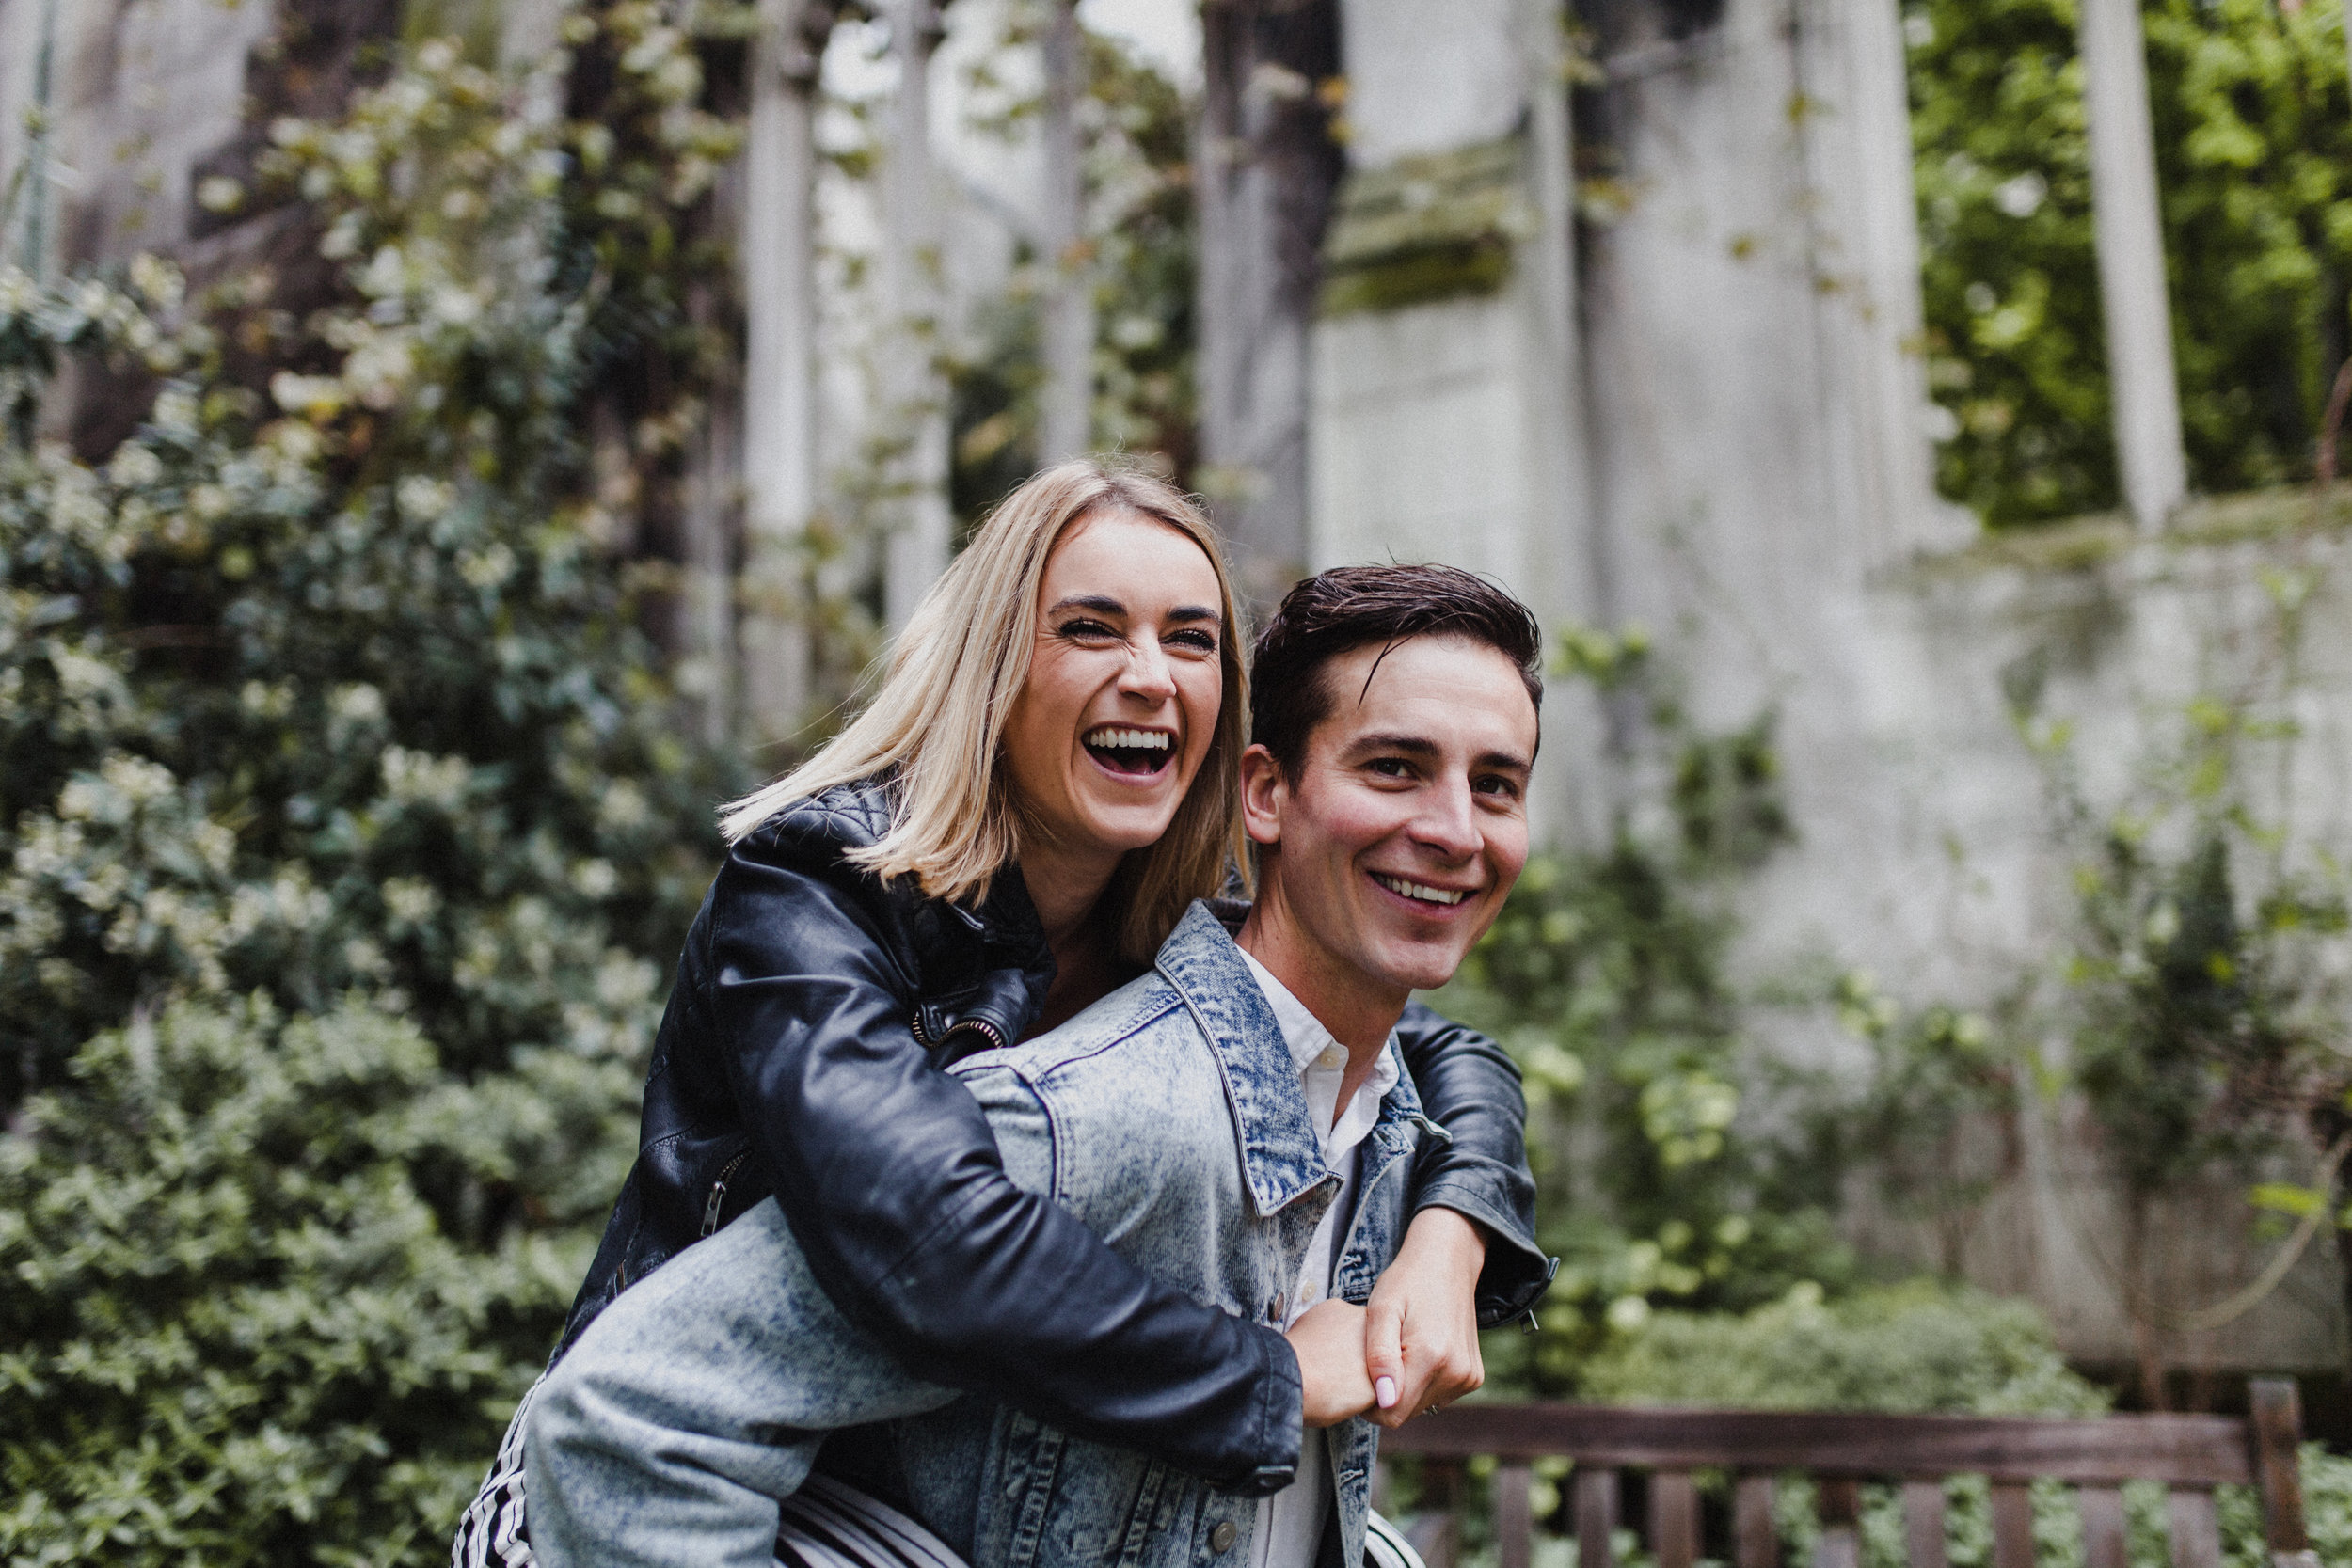 Fun pre-wedding portrait of the couple laughing.